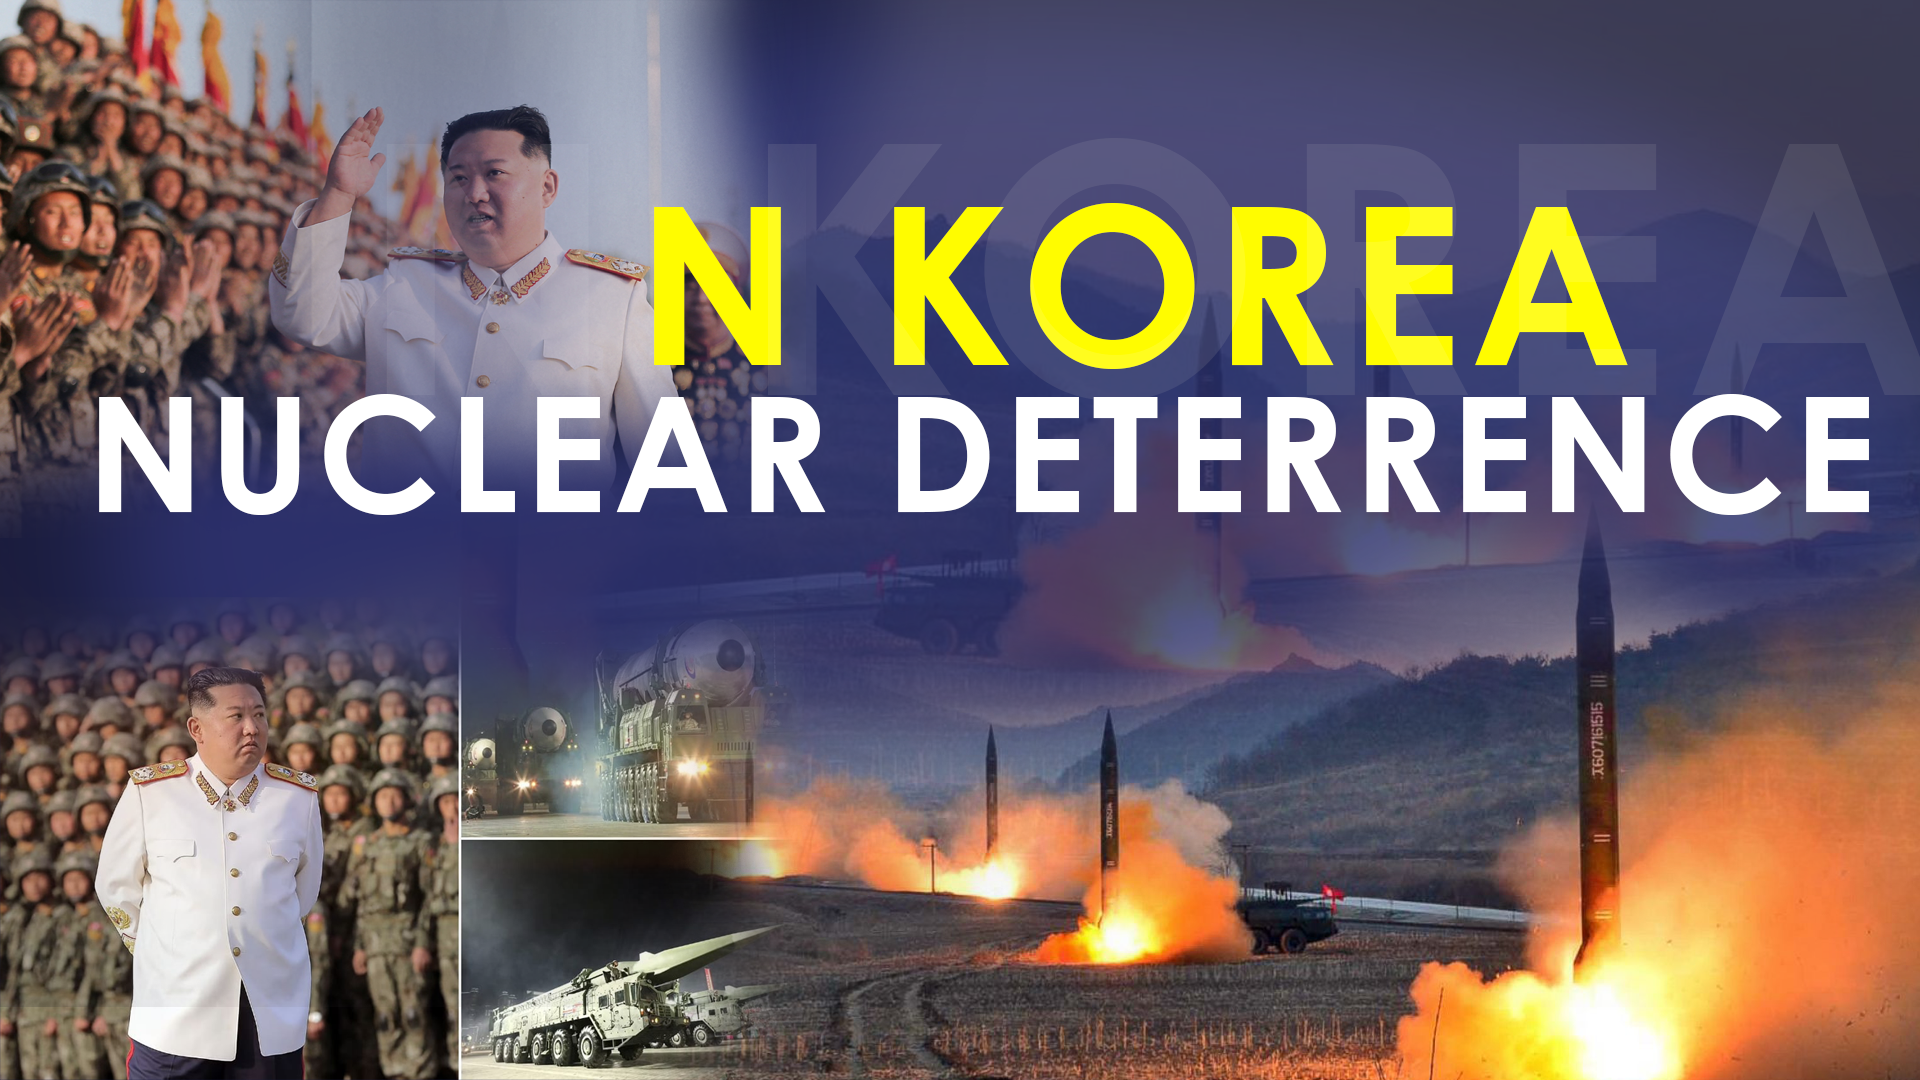 North Korea's nuclear deterrence